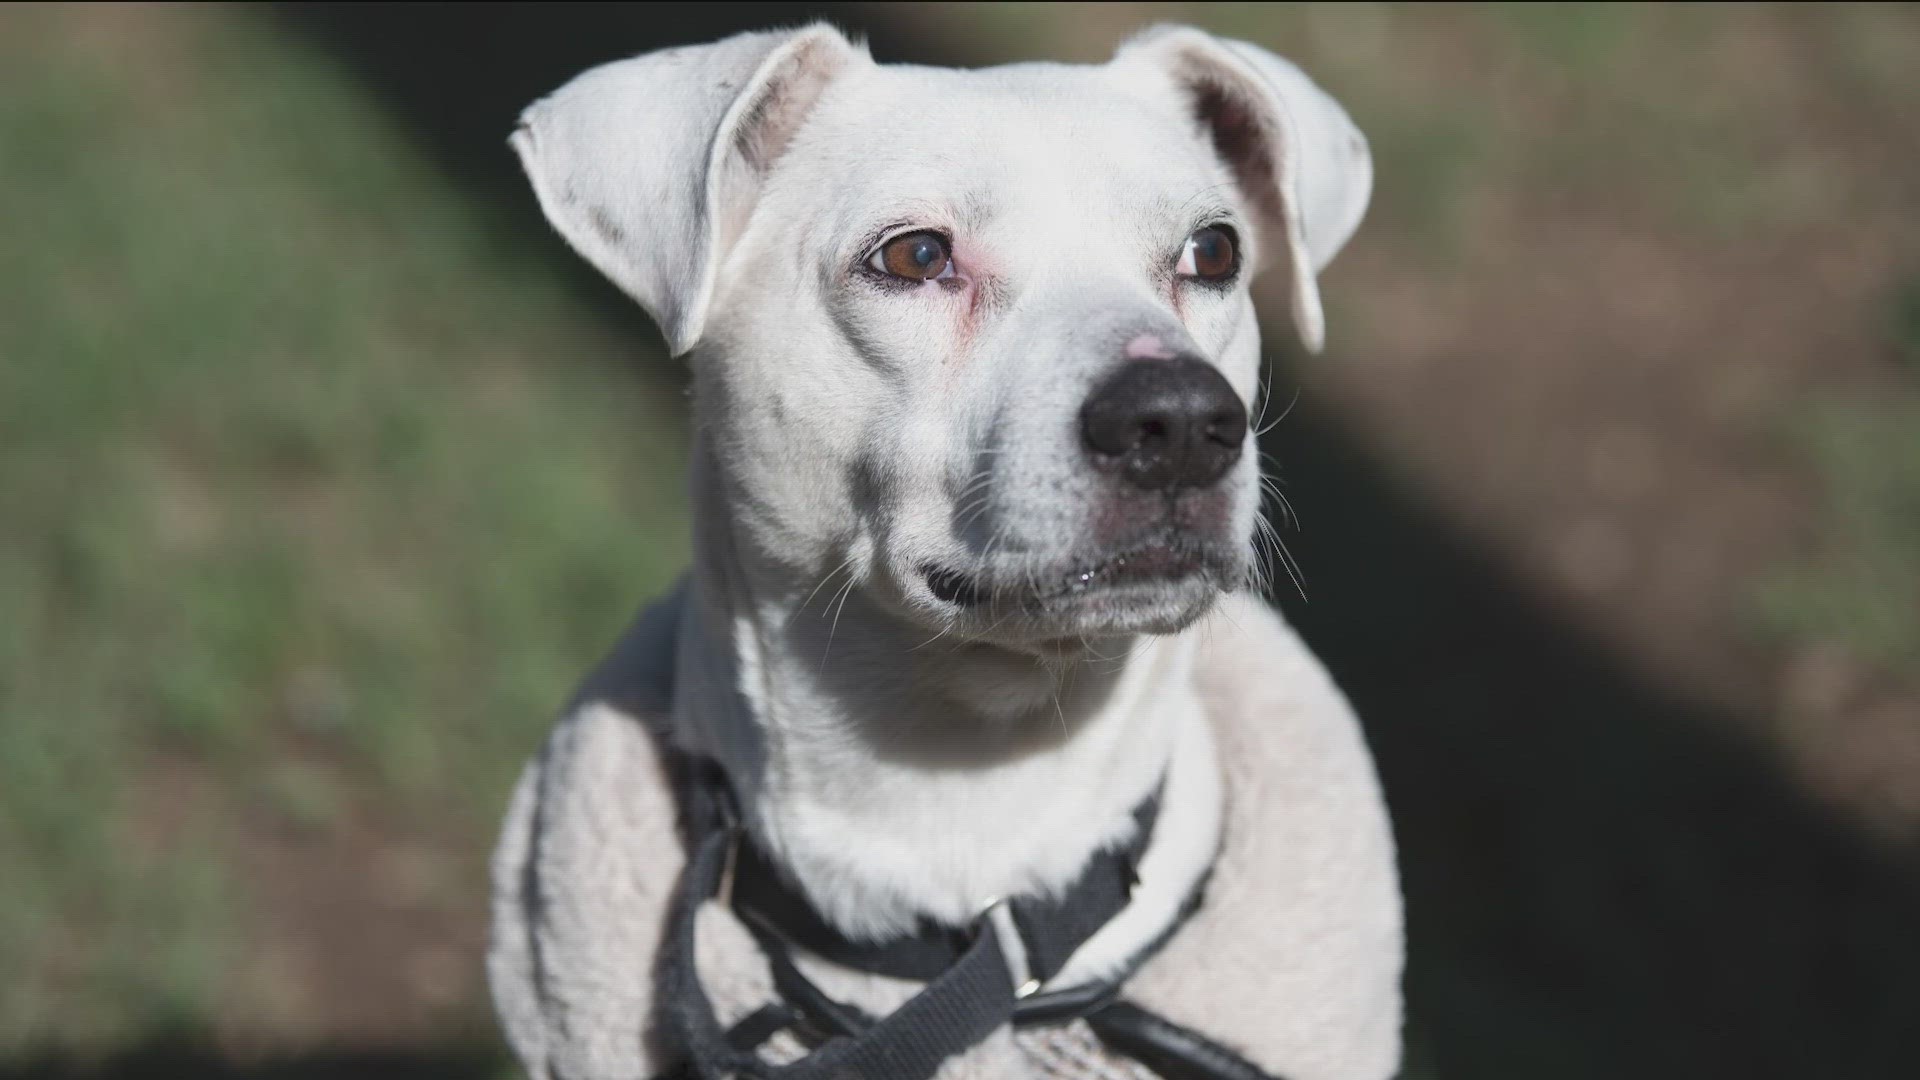 Abby is deaf, but loving, and is up for adoption at Austin Pets Alive!